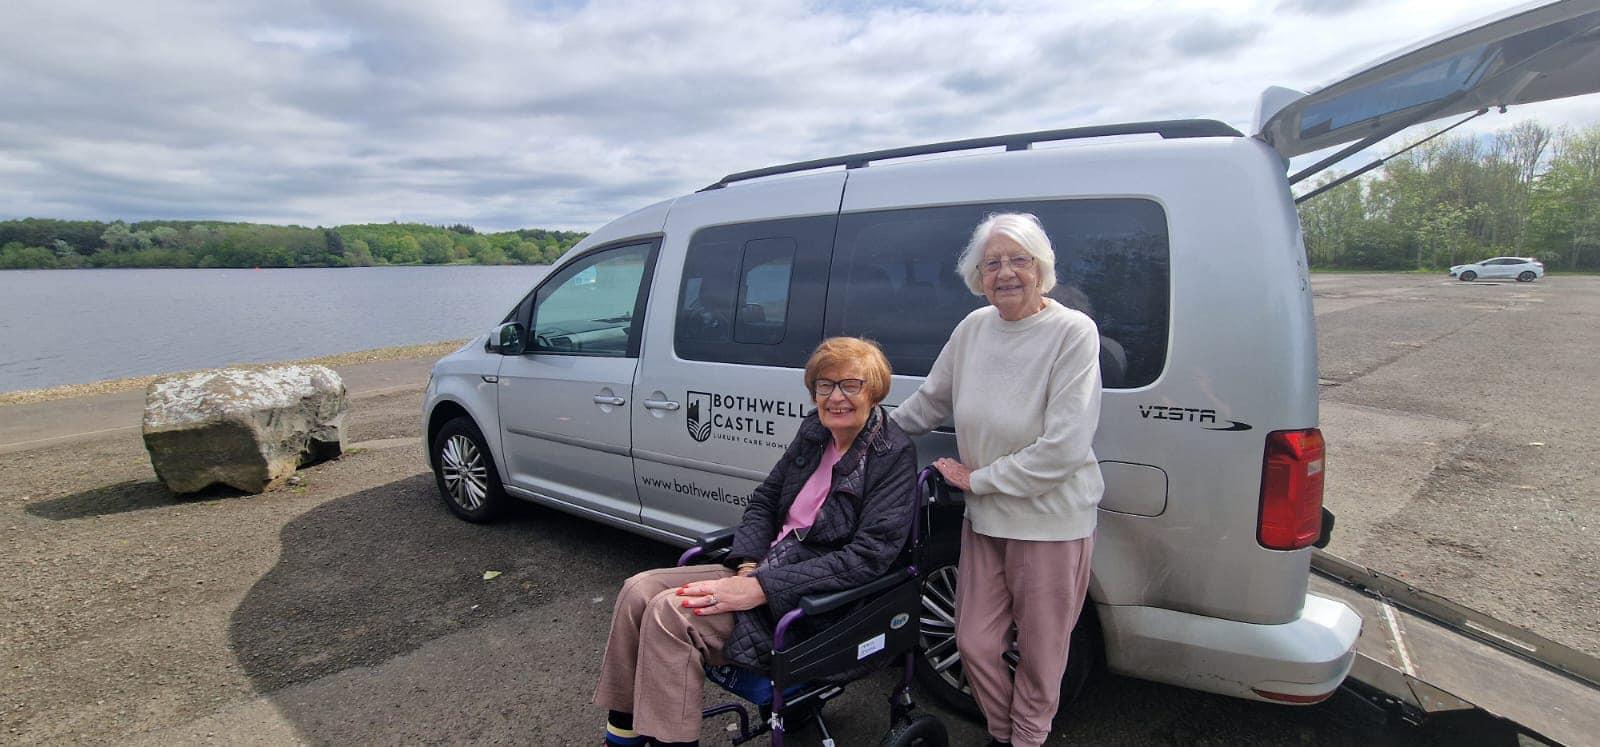 residents on a trip in the van